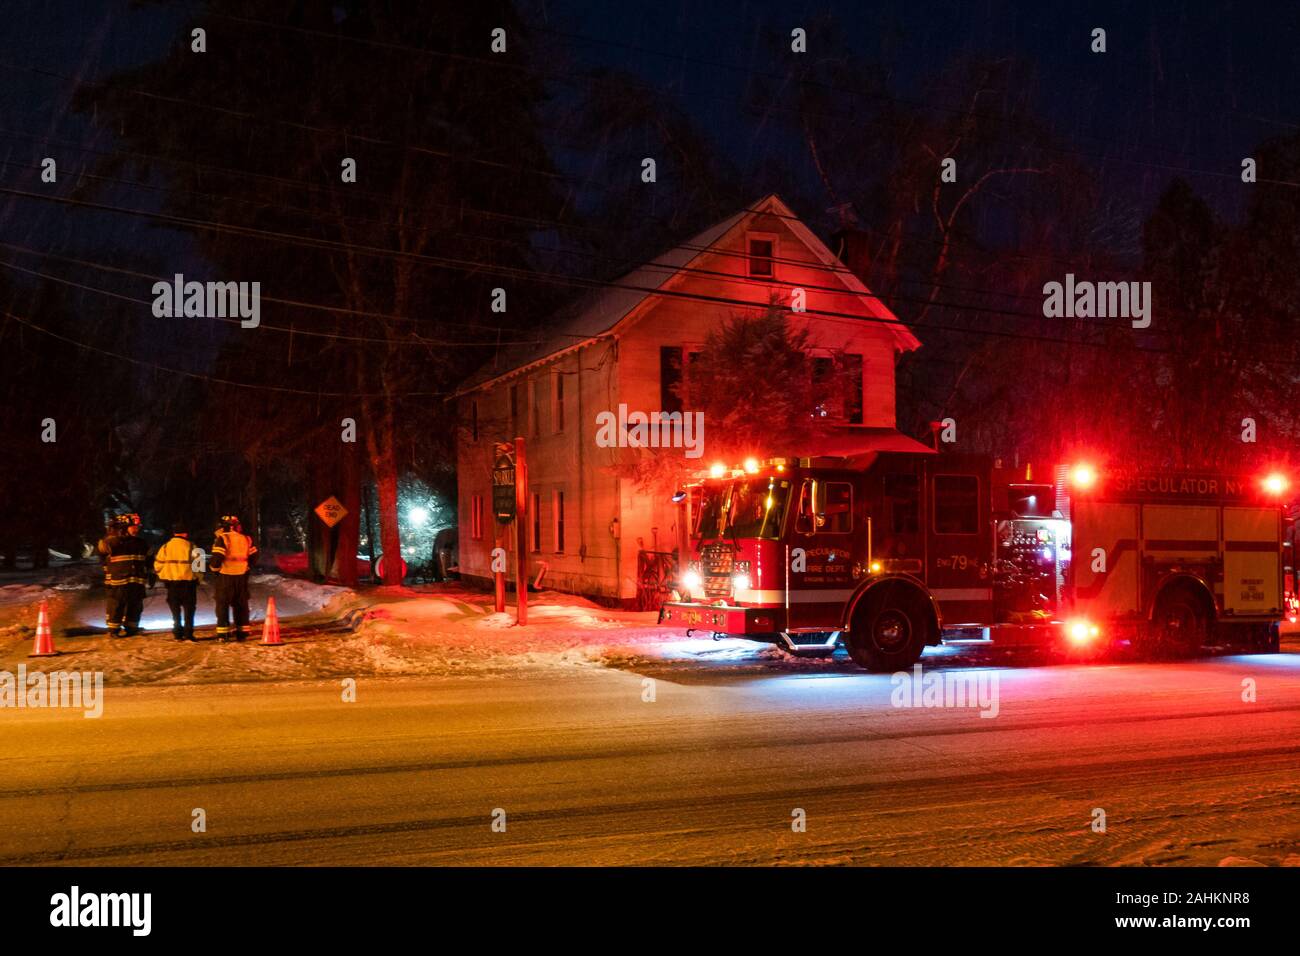 A fire truck and firemen responding to snow storm damage to electrical wires in Speculator, NY USA on a cold winter night. Stock Photo